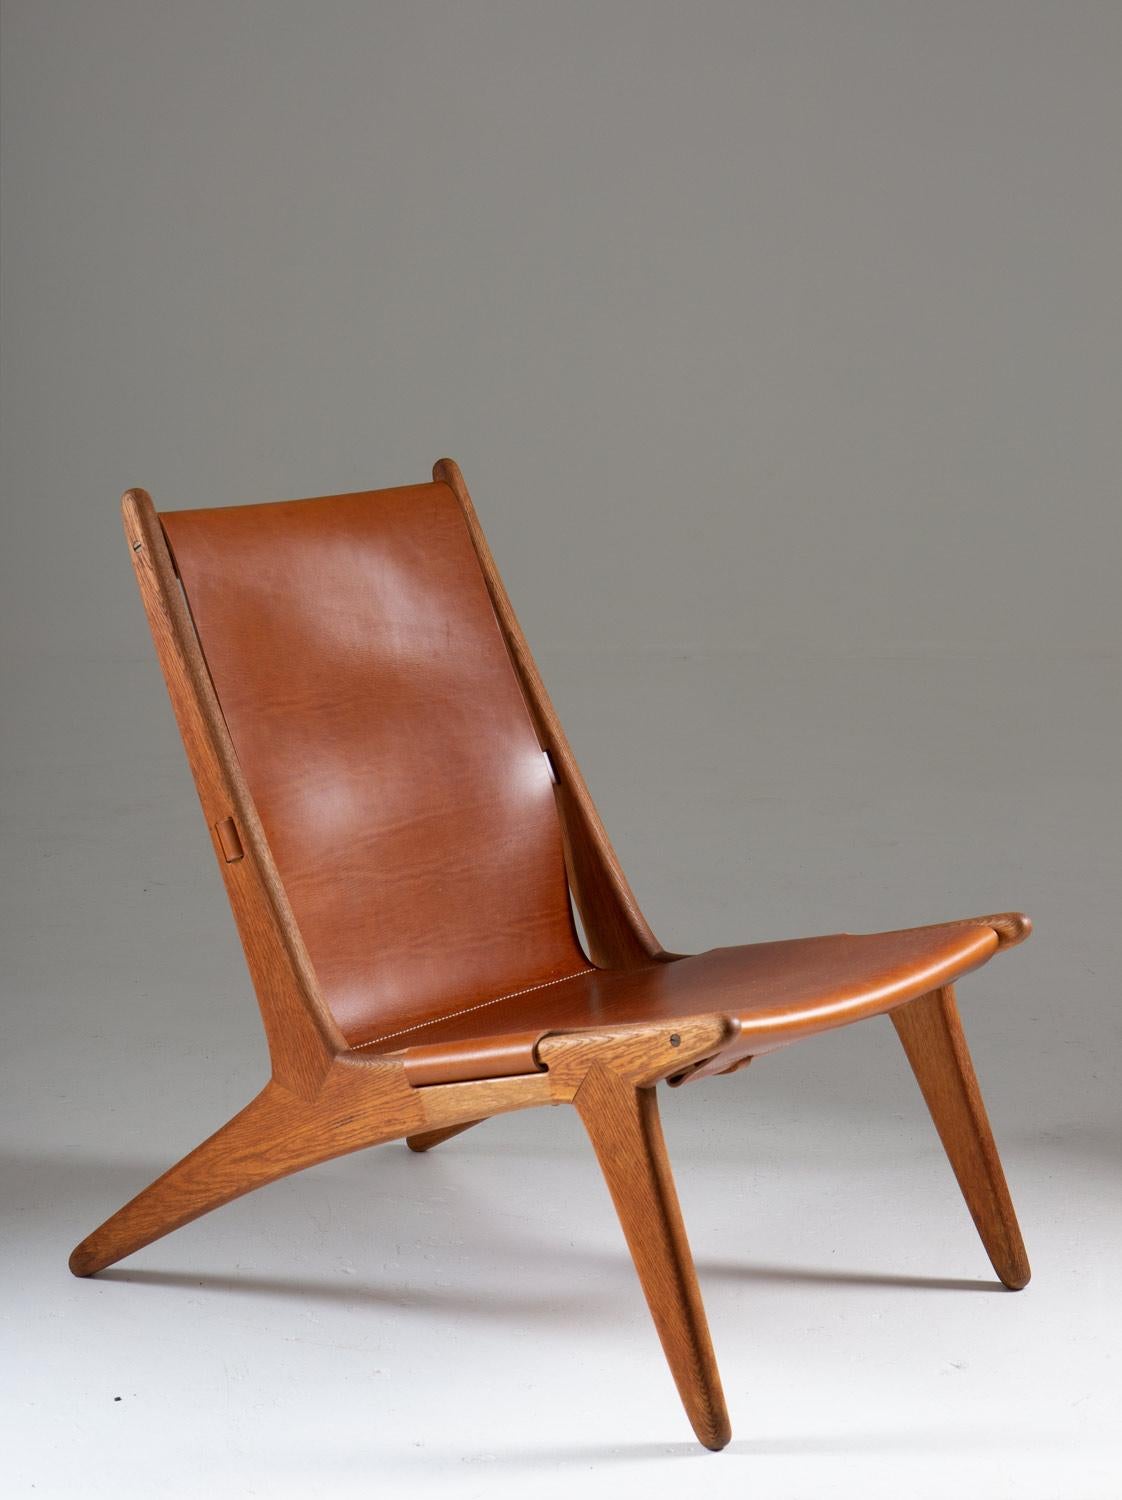 Pair of rare lounge chairs model 204 by Uno & O¨sten Kristiansson for Luxus, Sweden.
The hunting chair was designed by Uno and O¨sten Kristiansson in 1954 and belongs at the top of Swedish design history. The chair features a frame in oak and a